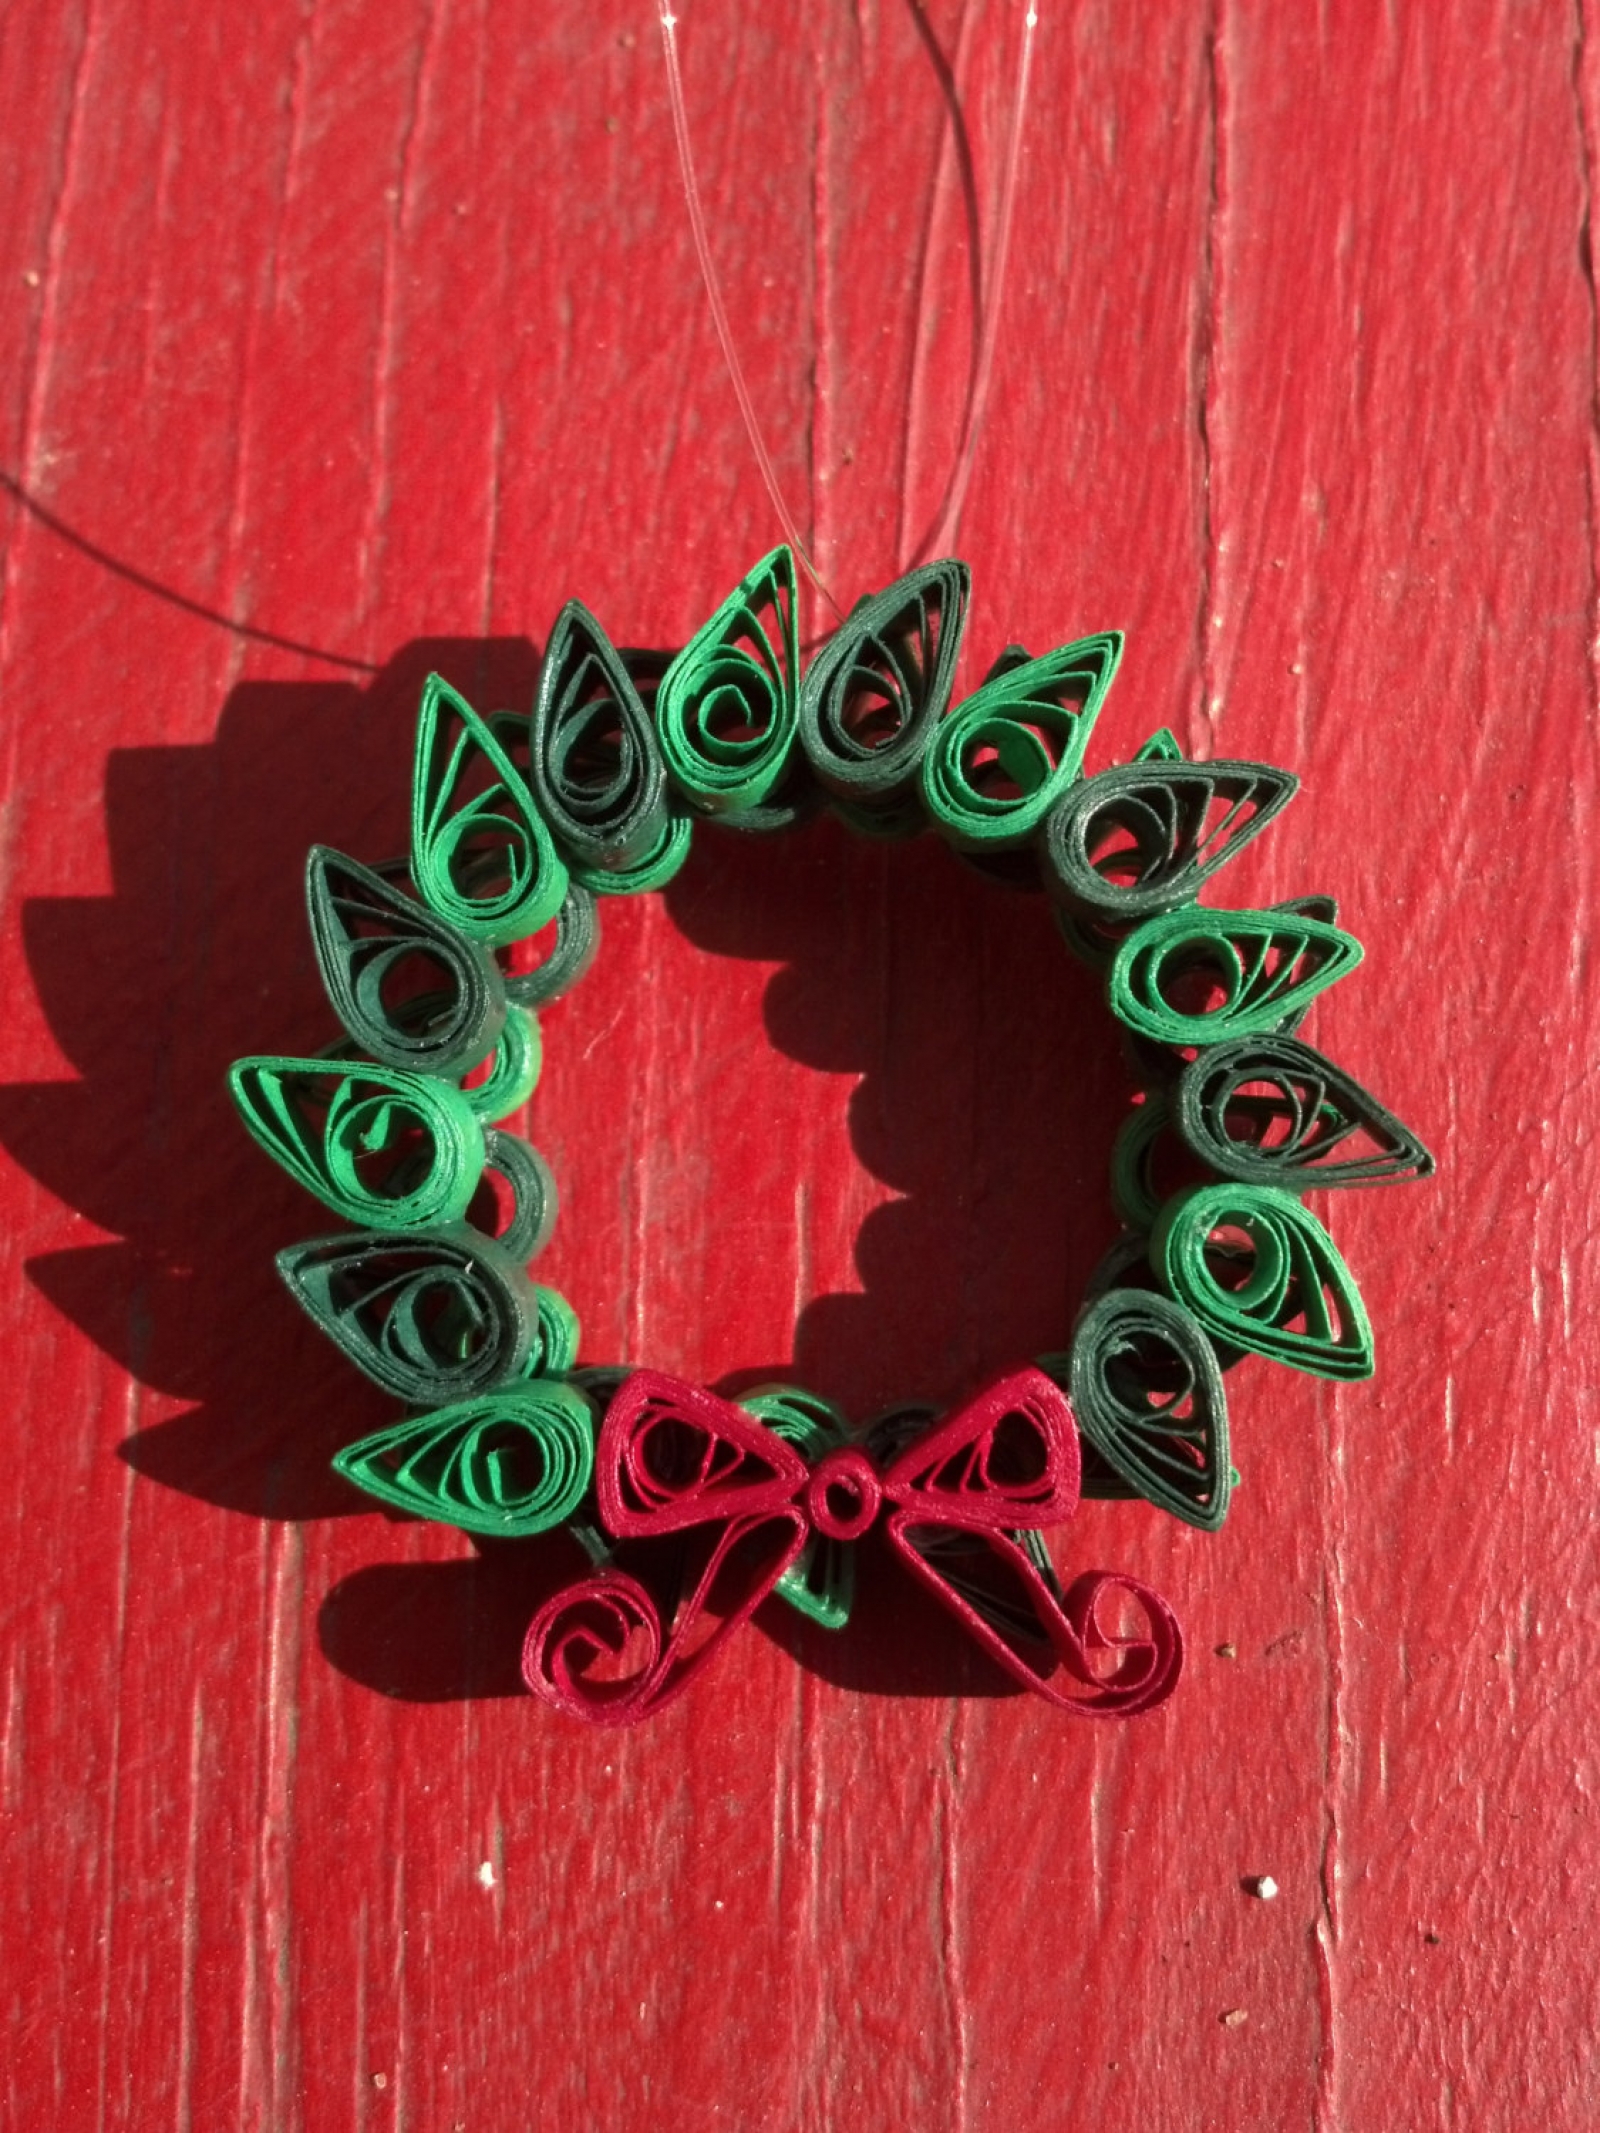 Christmas quilling idea: Paper Quilled Wreath Craft